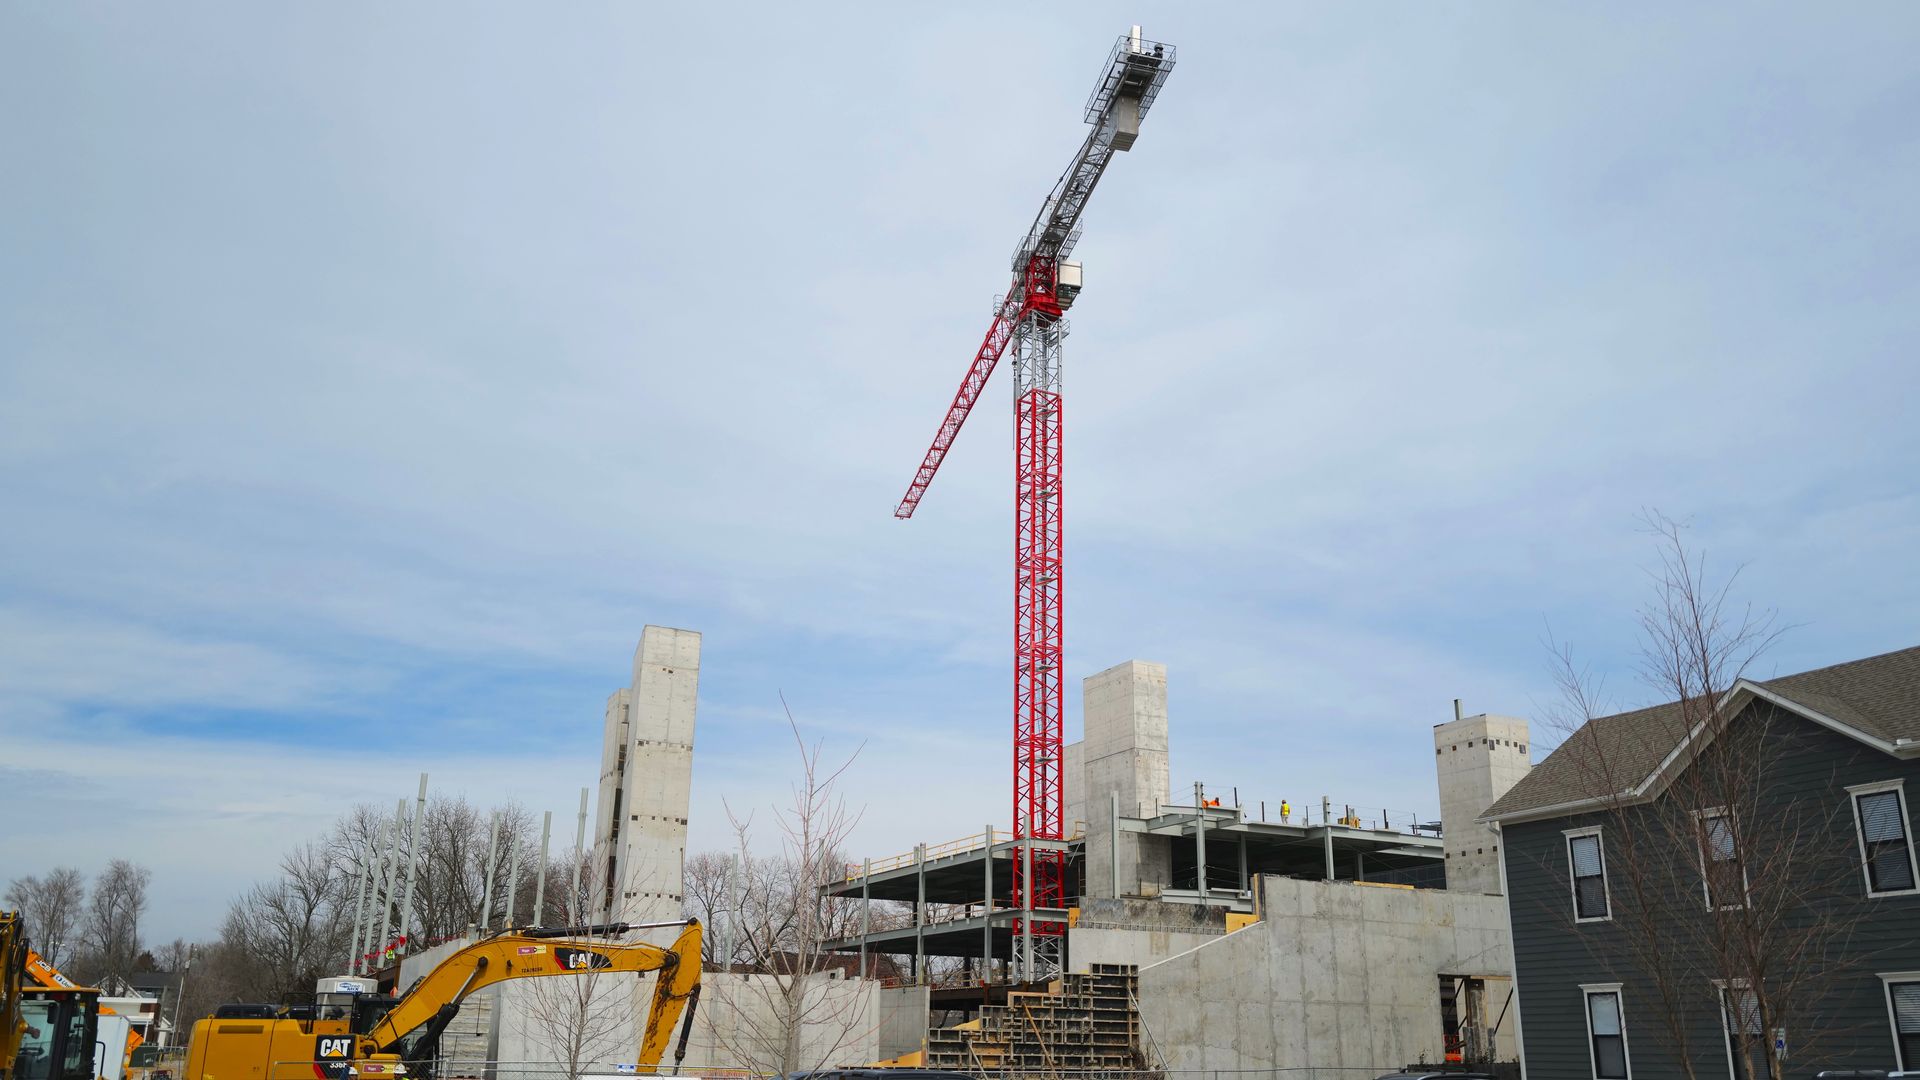 A construction project in downtown Bentonville. Photo: Worth Sparkman/Axios